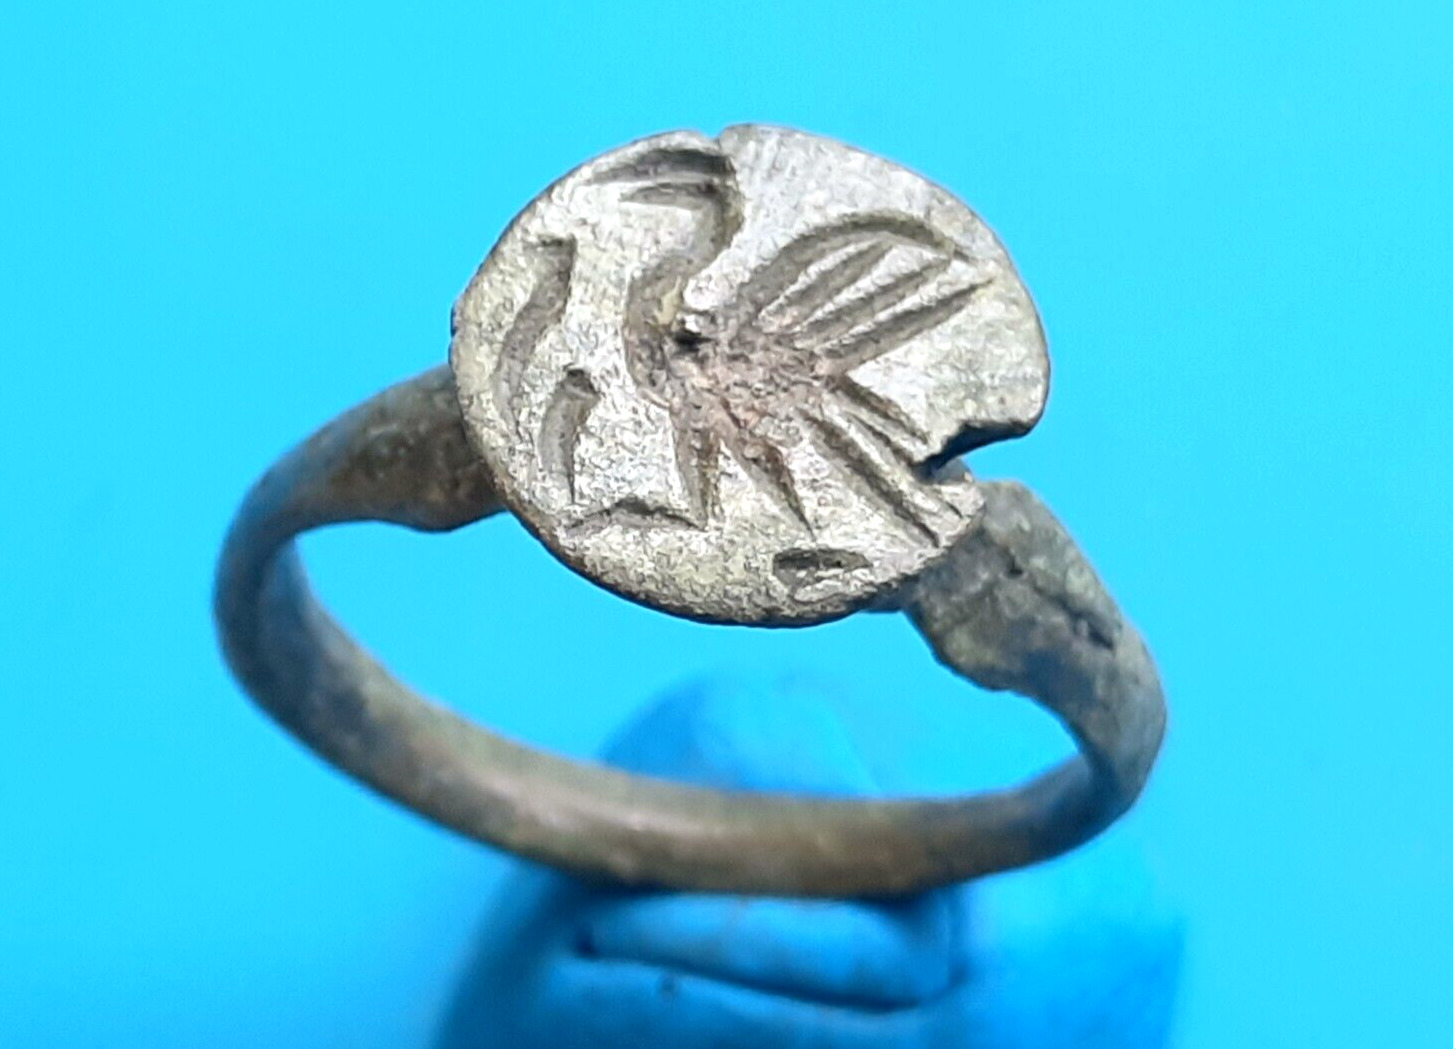 Medieval ring with a mythical griffin.